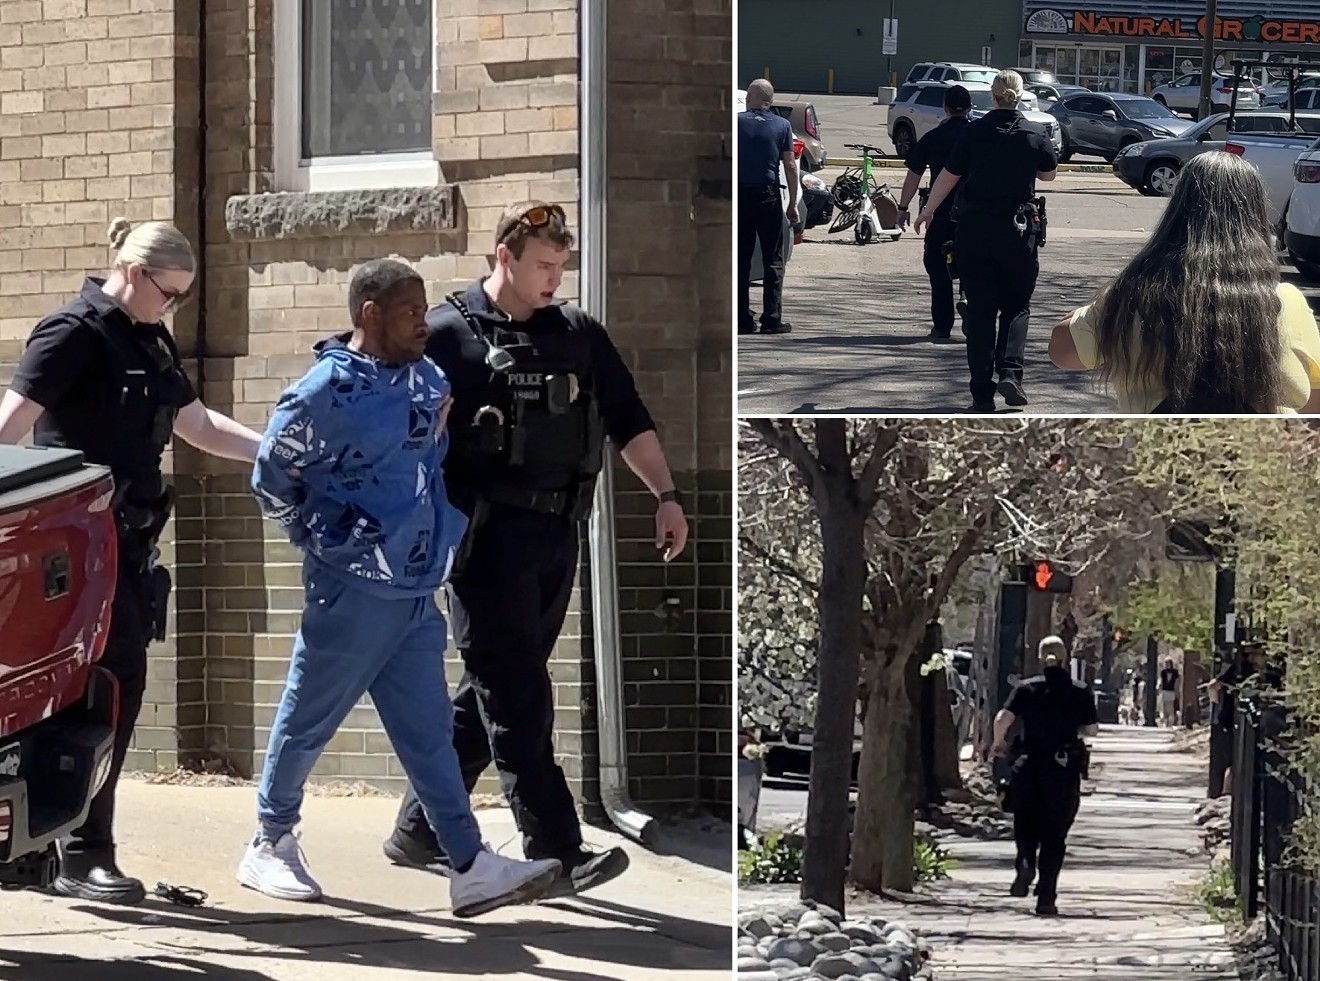 Shots from Westword's April 12 walk-along with the Denver Police Department.